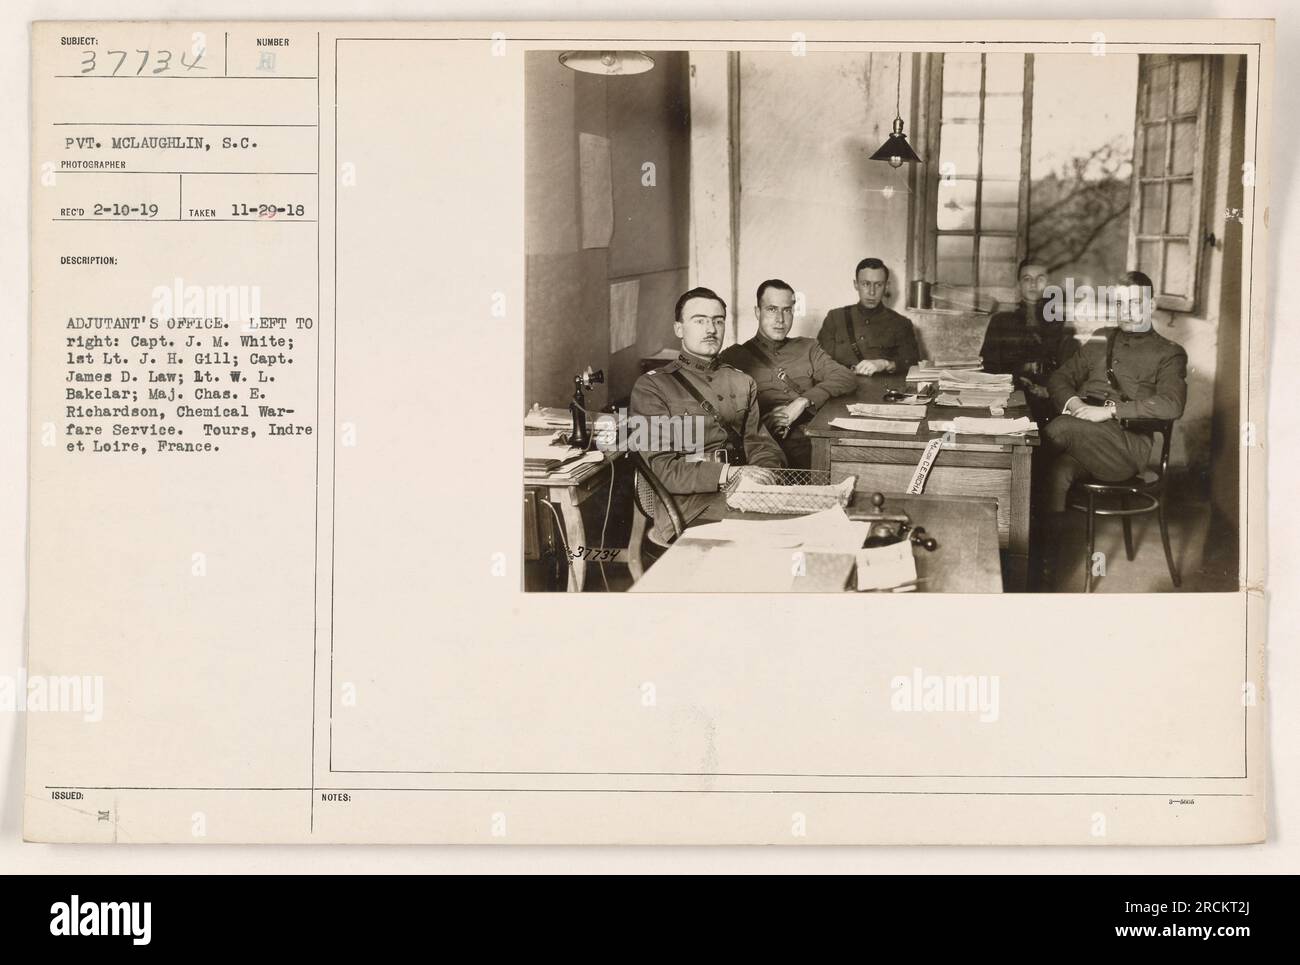 Pictured in this photograph is the Adjutant's Office in Tours, France during World War One. From left to right, the individuals are identified as Capt. J. M. White, lat Lt. J. H. Gill, Capt. James D. Law, 1t. W. L. Bakelar, and Maj. Chas. E. Richardson of the Chemical Warfare Service. This photograph was taken on November 29, 1918. Stock Photo